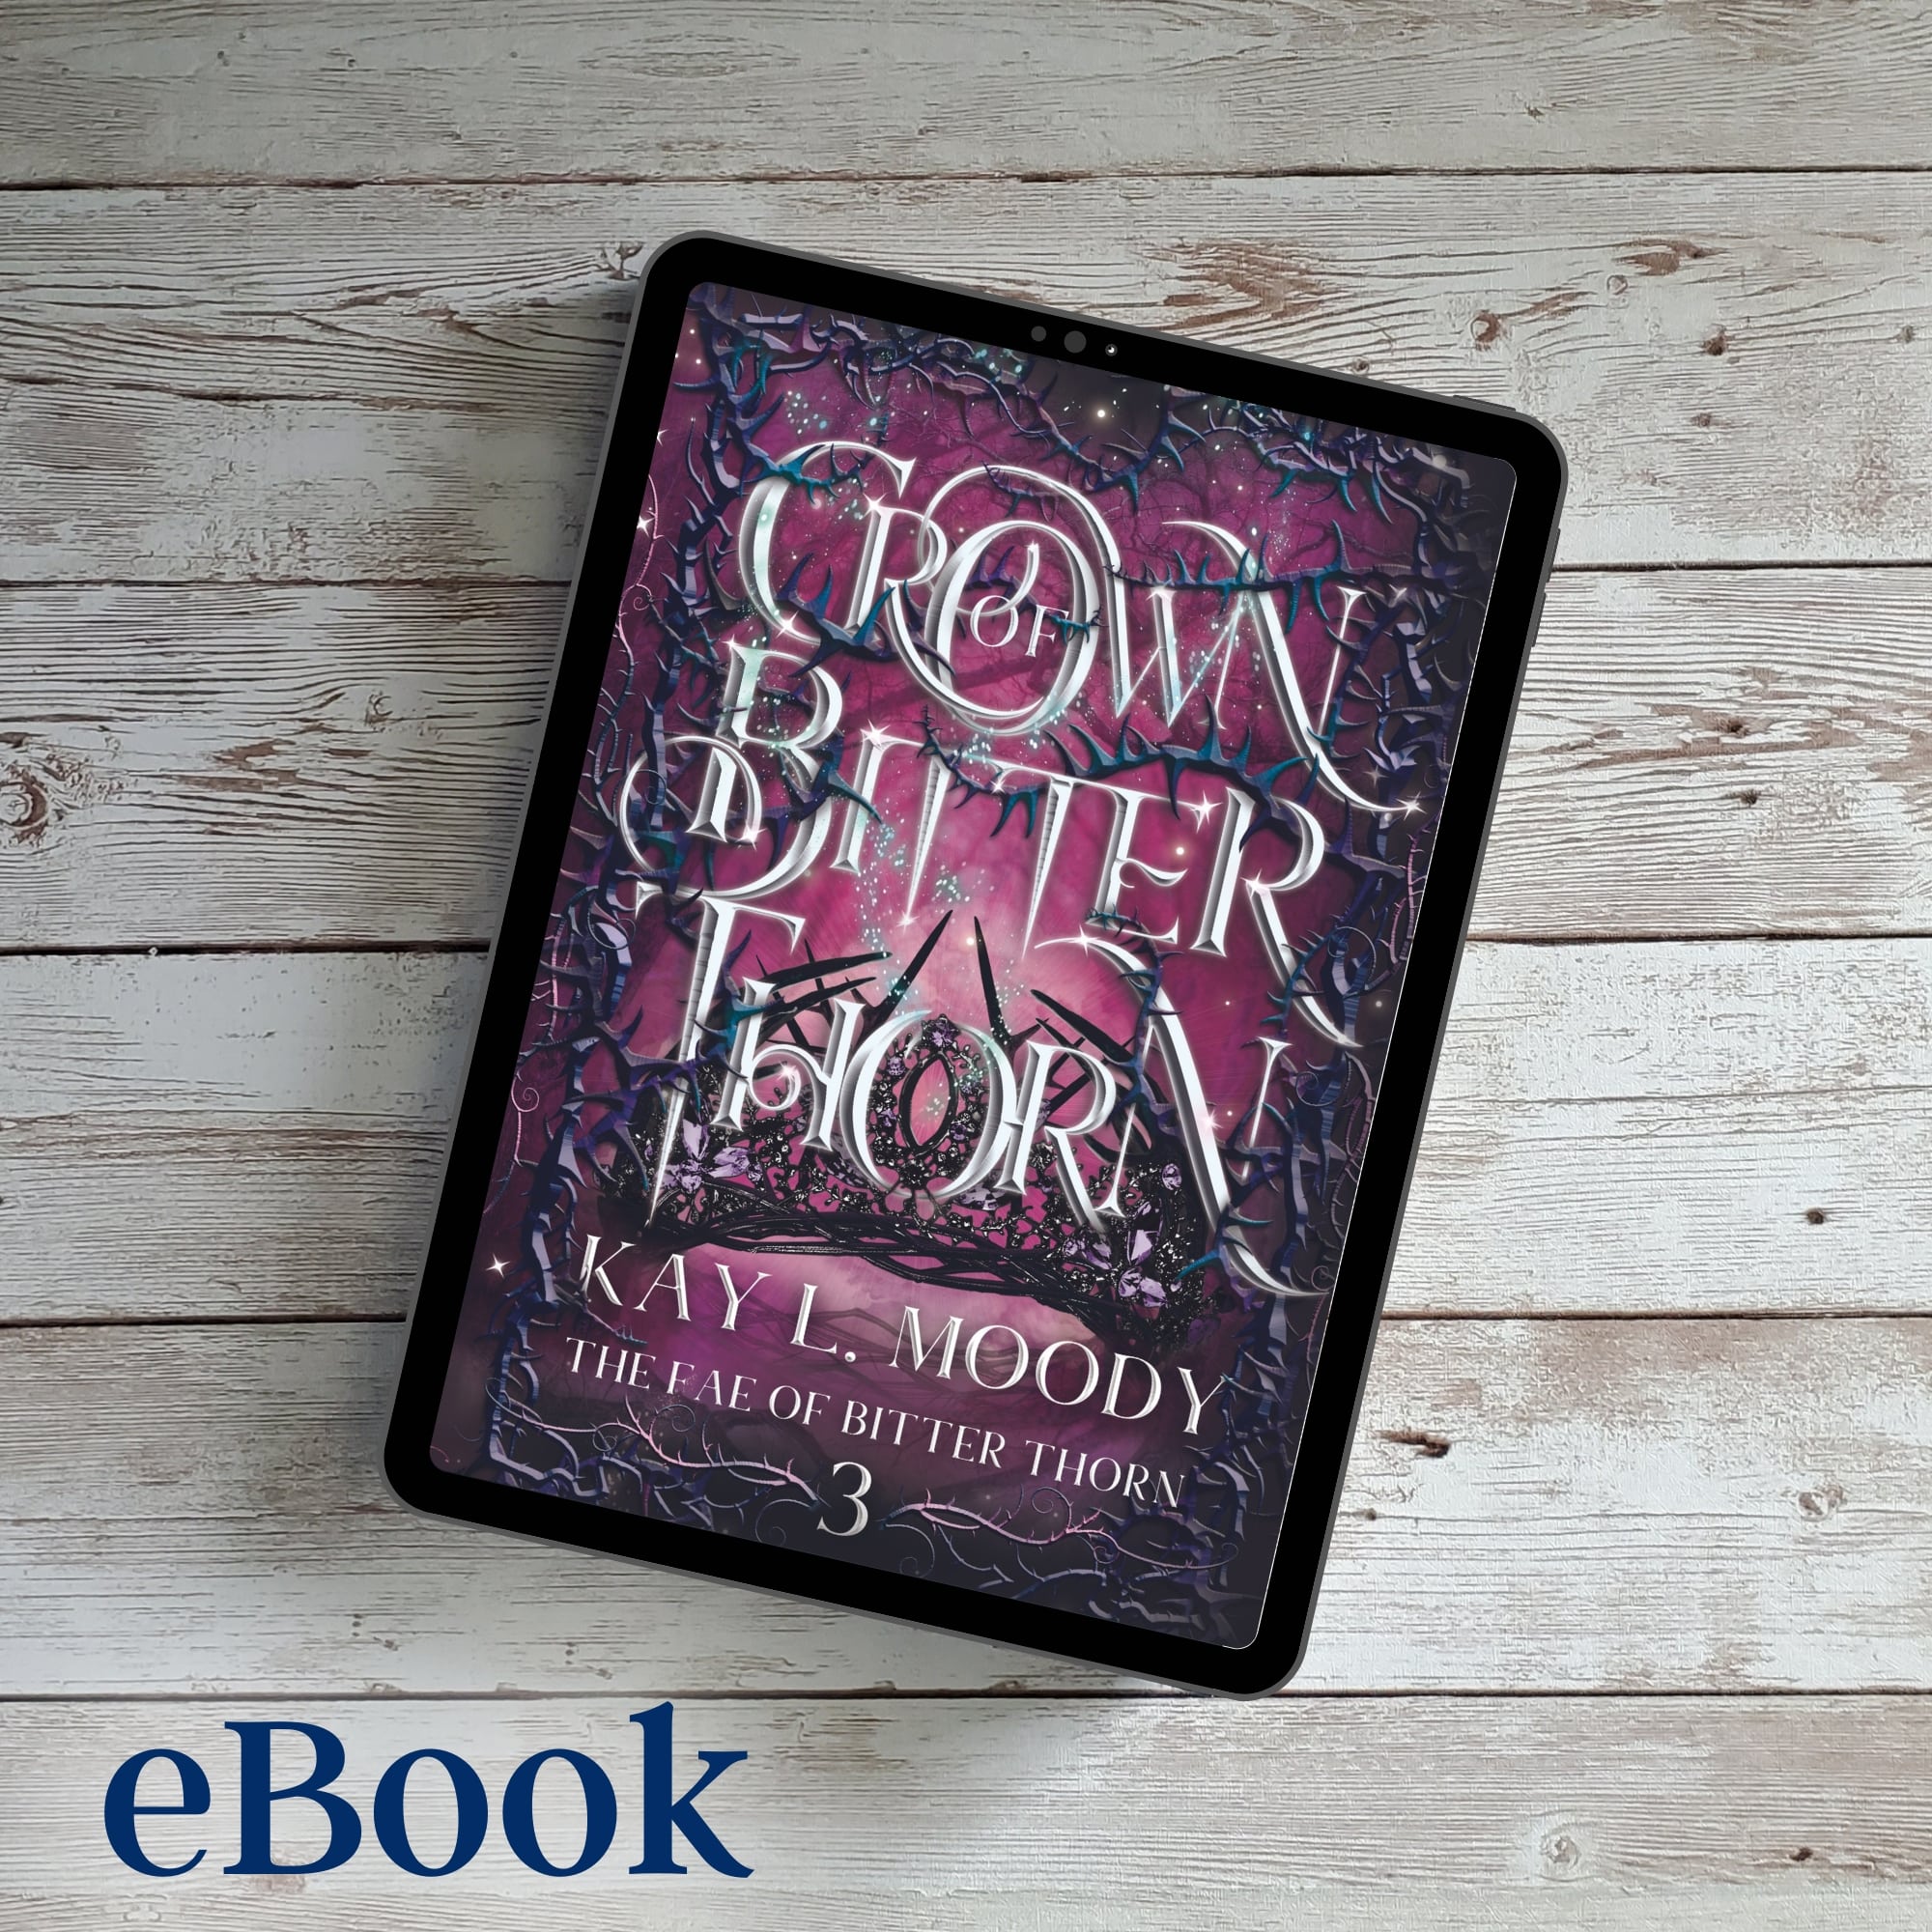 Crown of Bitter Thorn (The Fae of Bitter Thorn, #3)